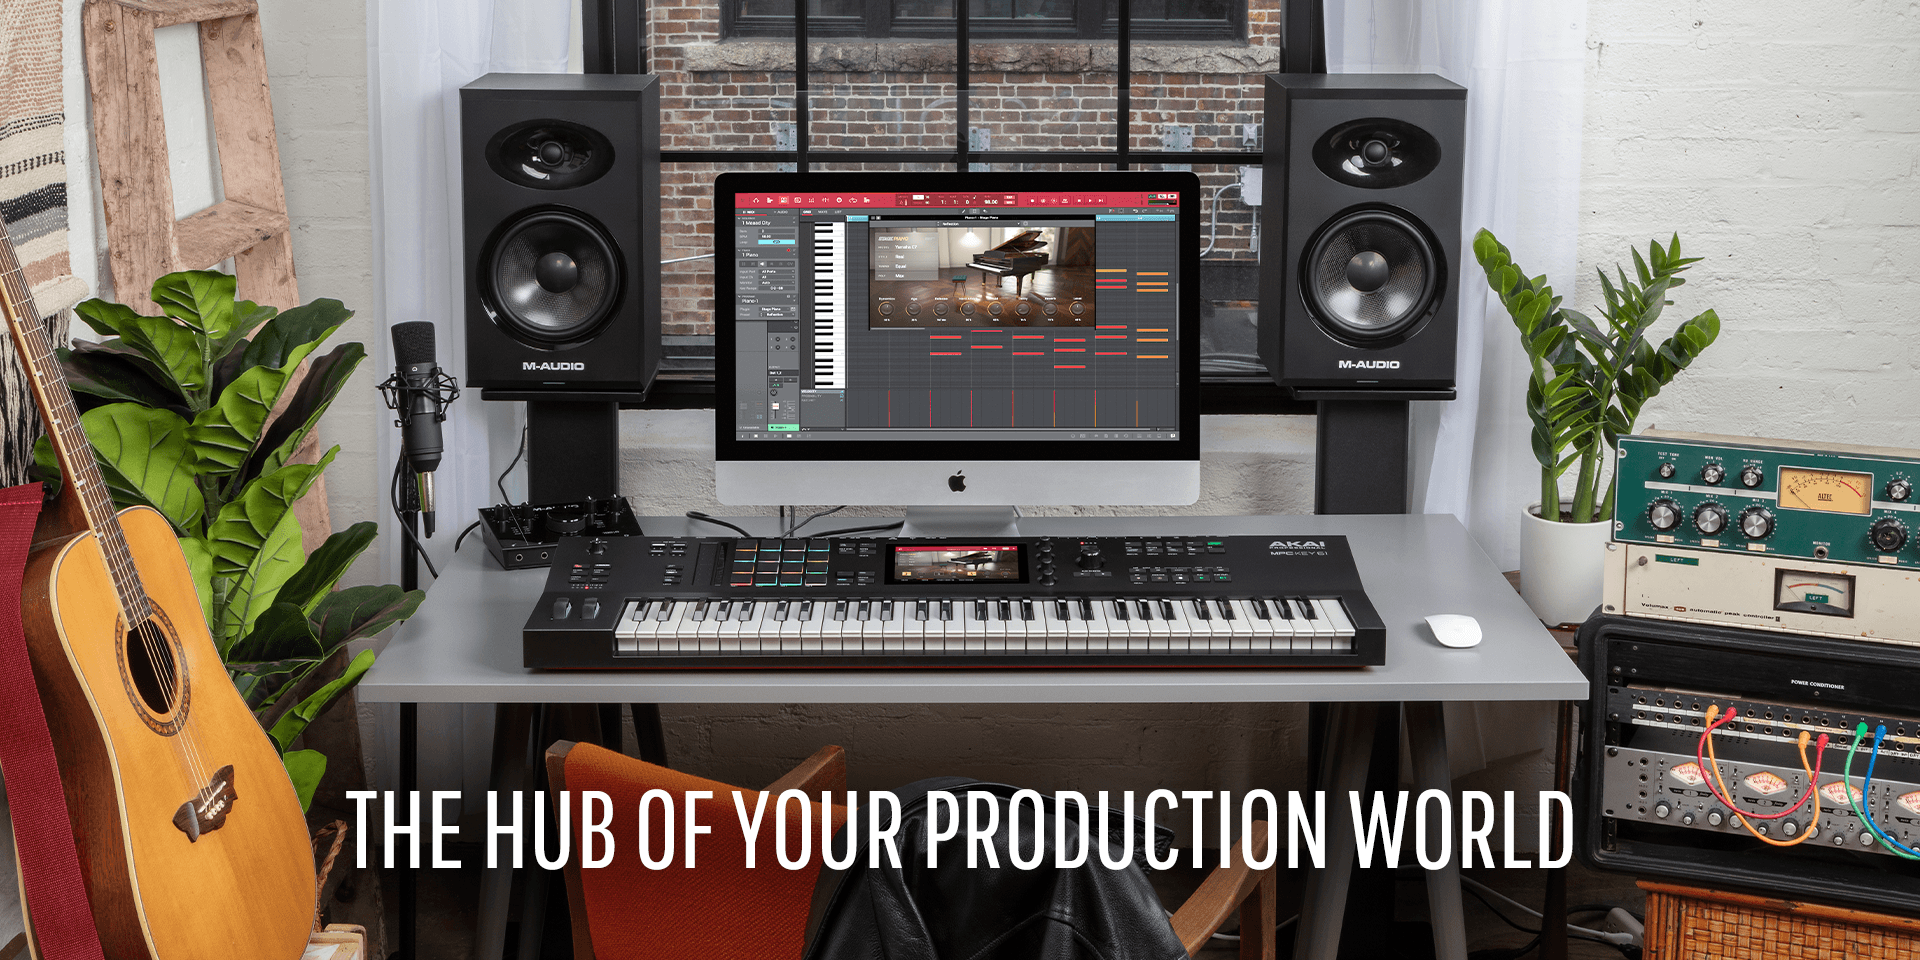 The hub of your production world